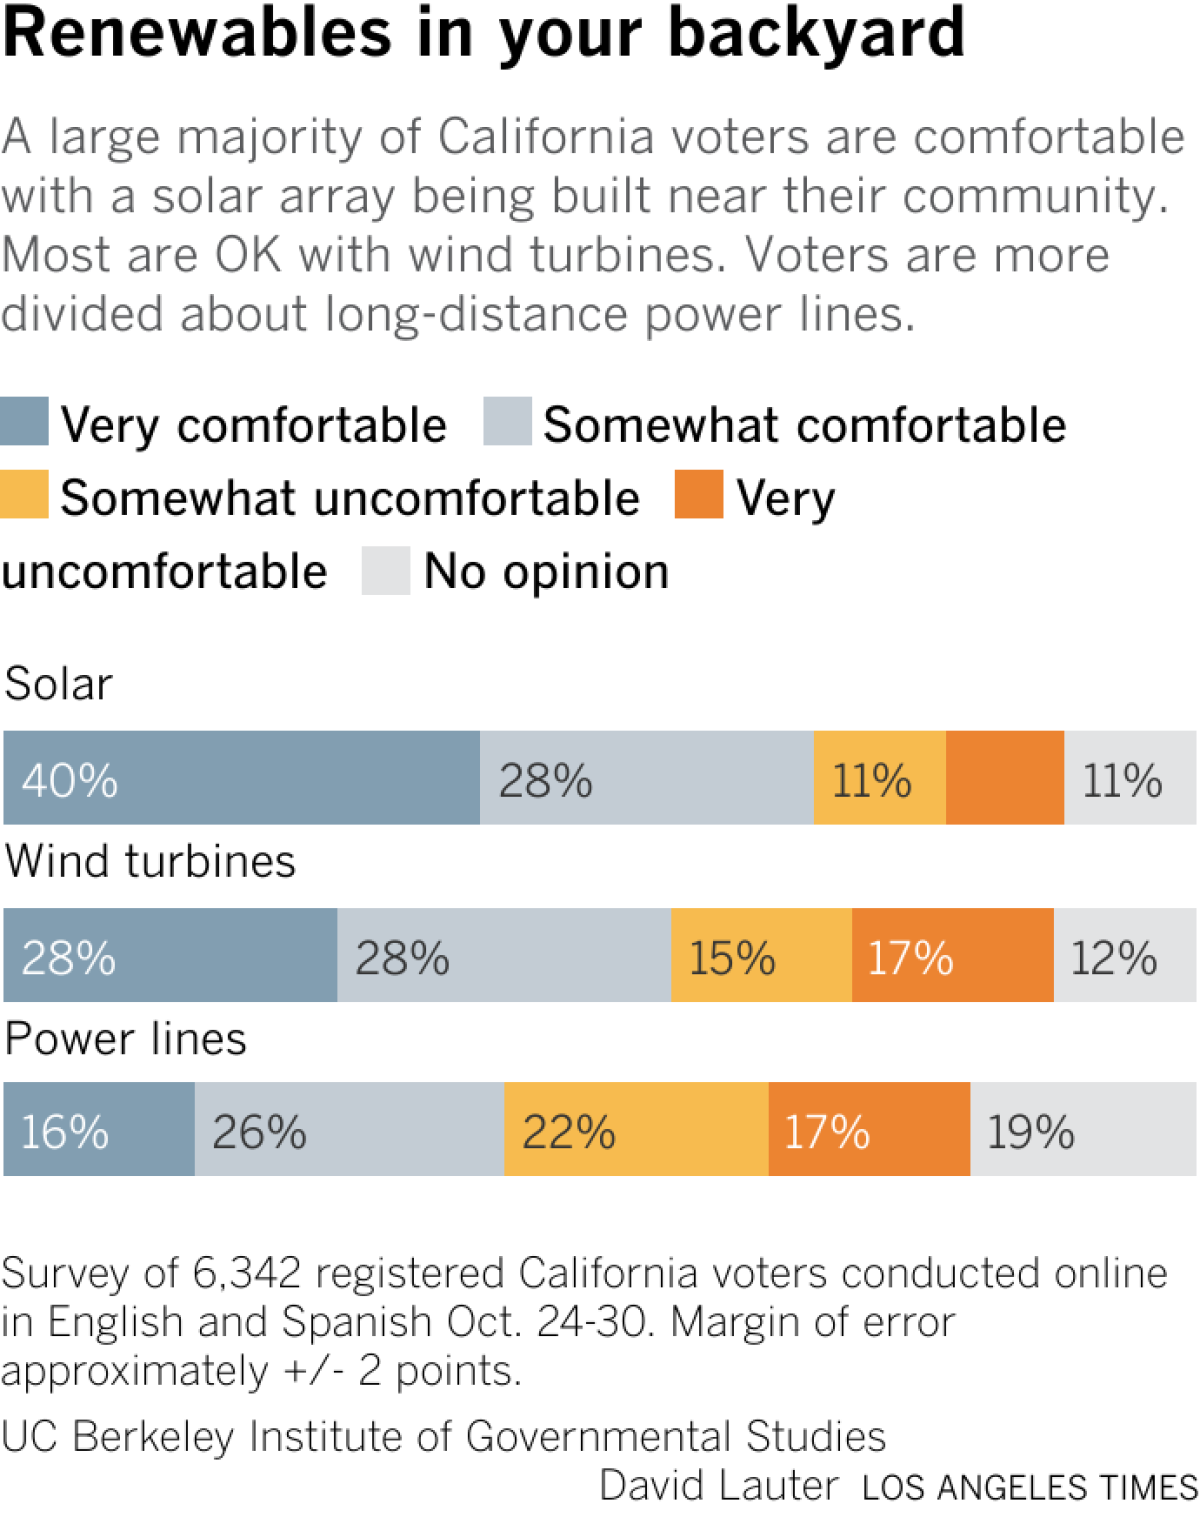 A large majority of California voters are comfortable with a solar array being built near their community. Most are OK with wind turbines. Voters are more divided about long-distance power lines.